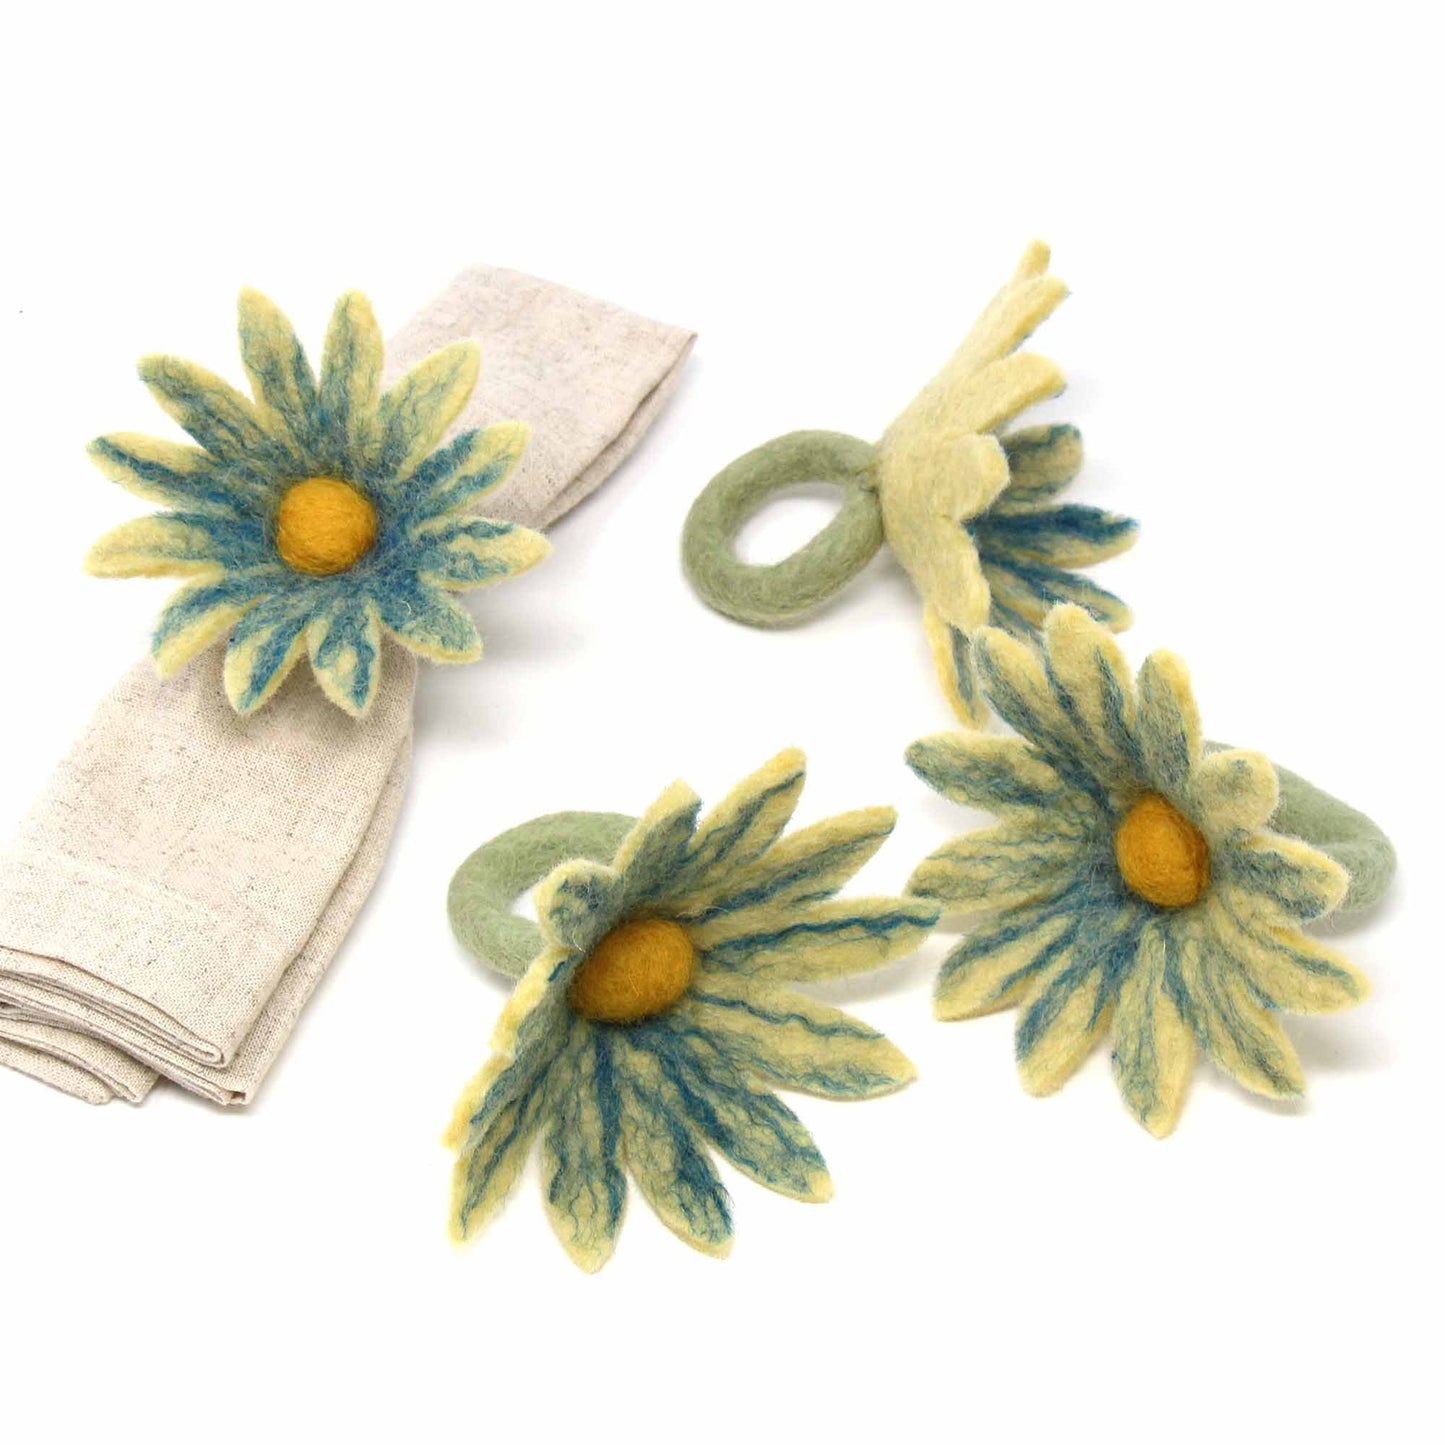 Daisy Napkin Rings - Set of Four Midnight - Global Groove (T)